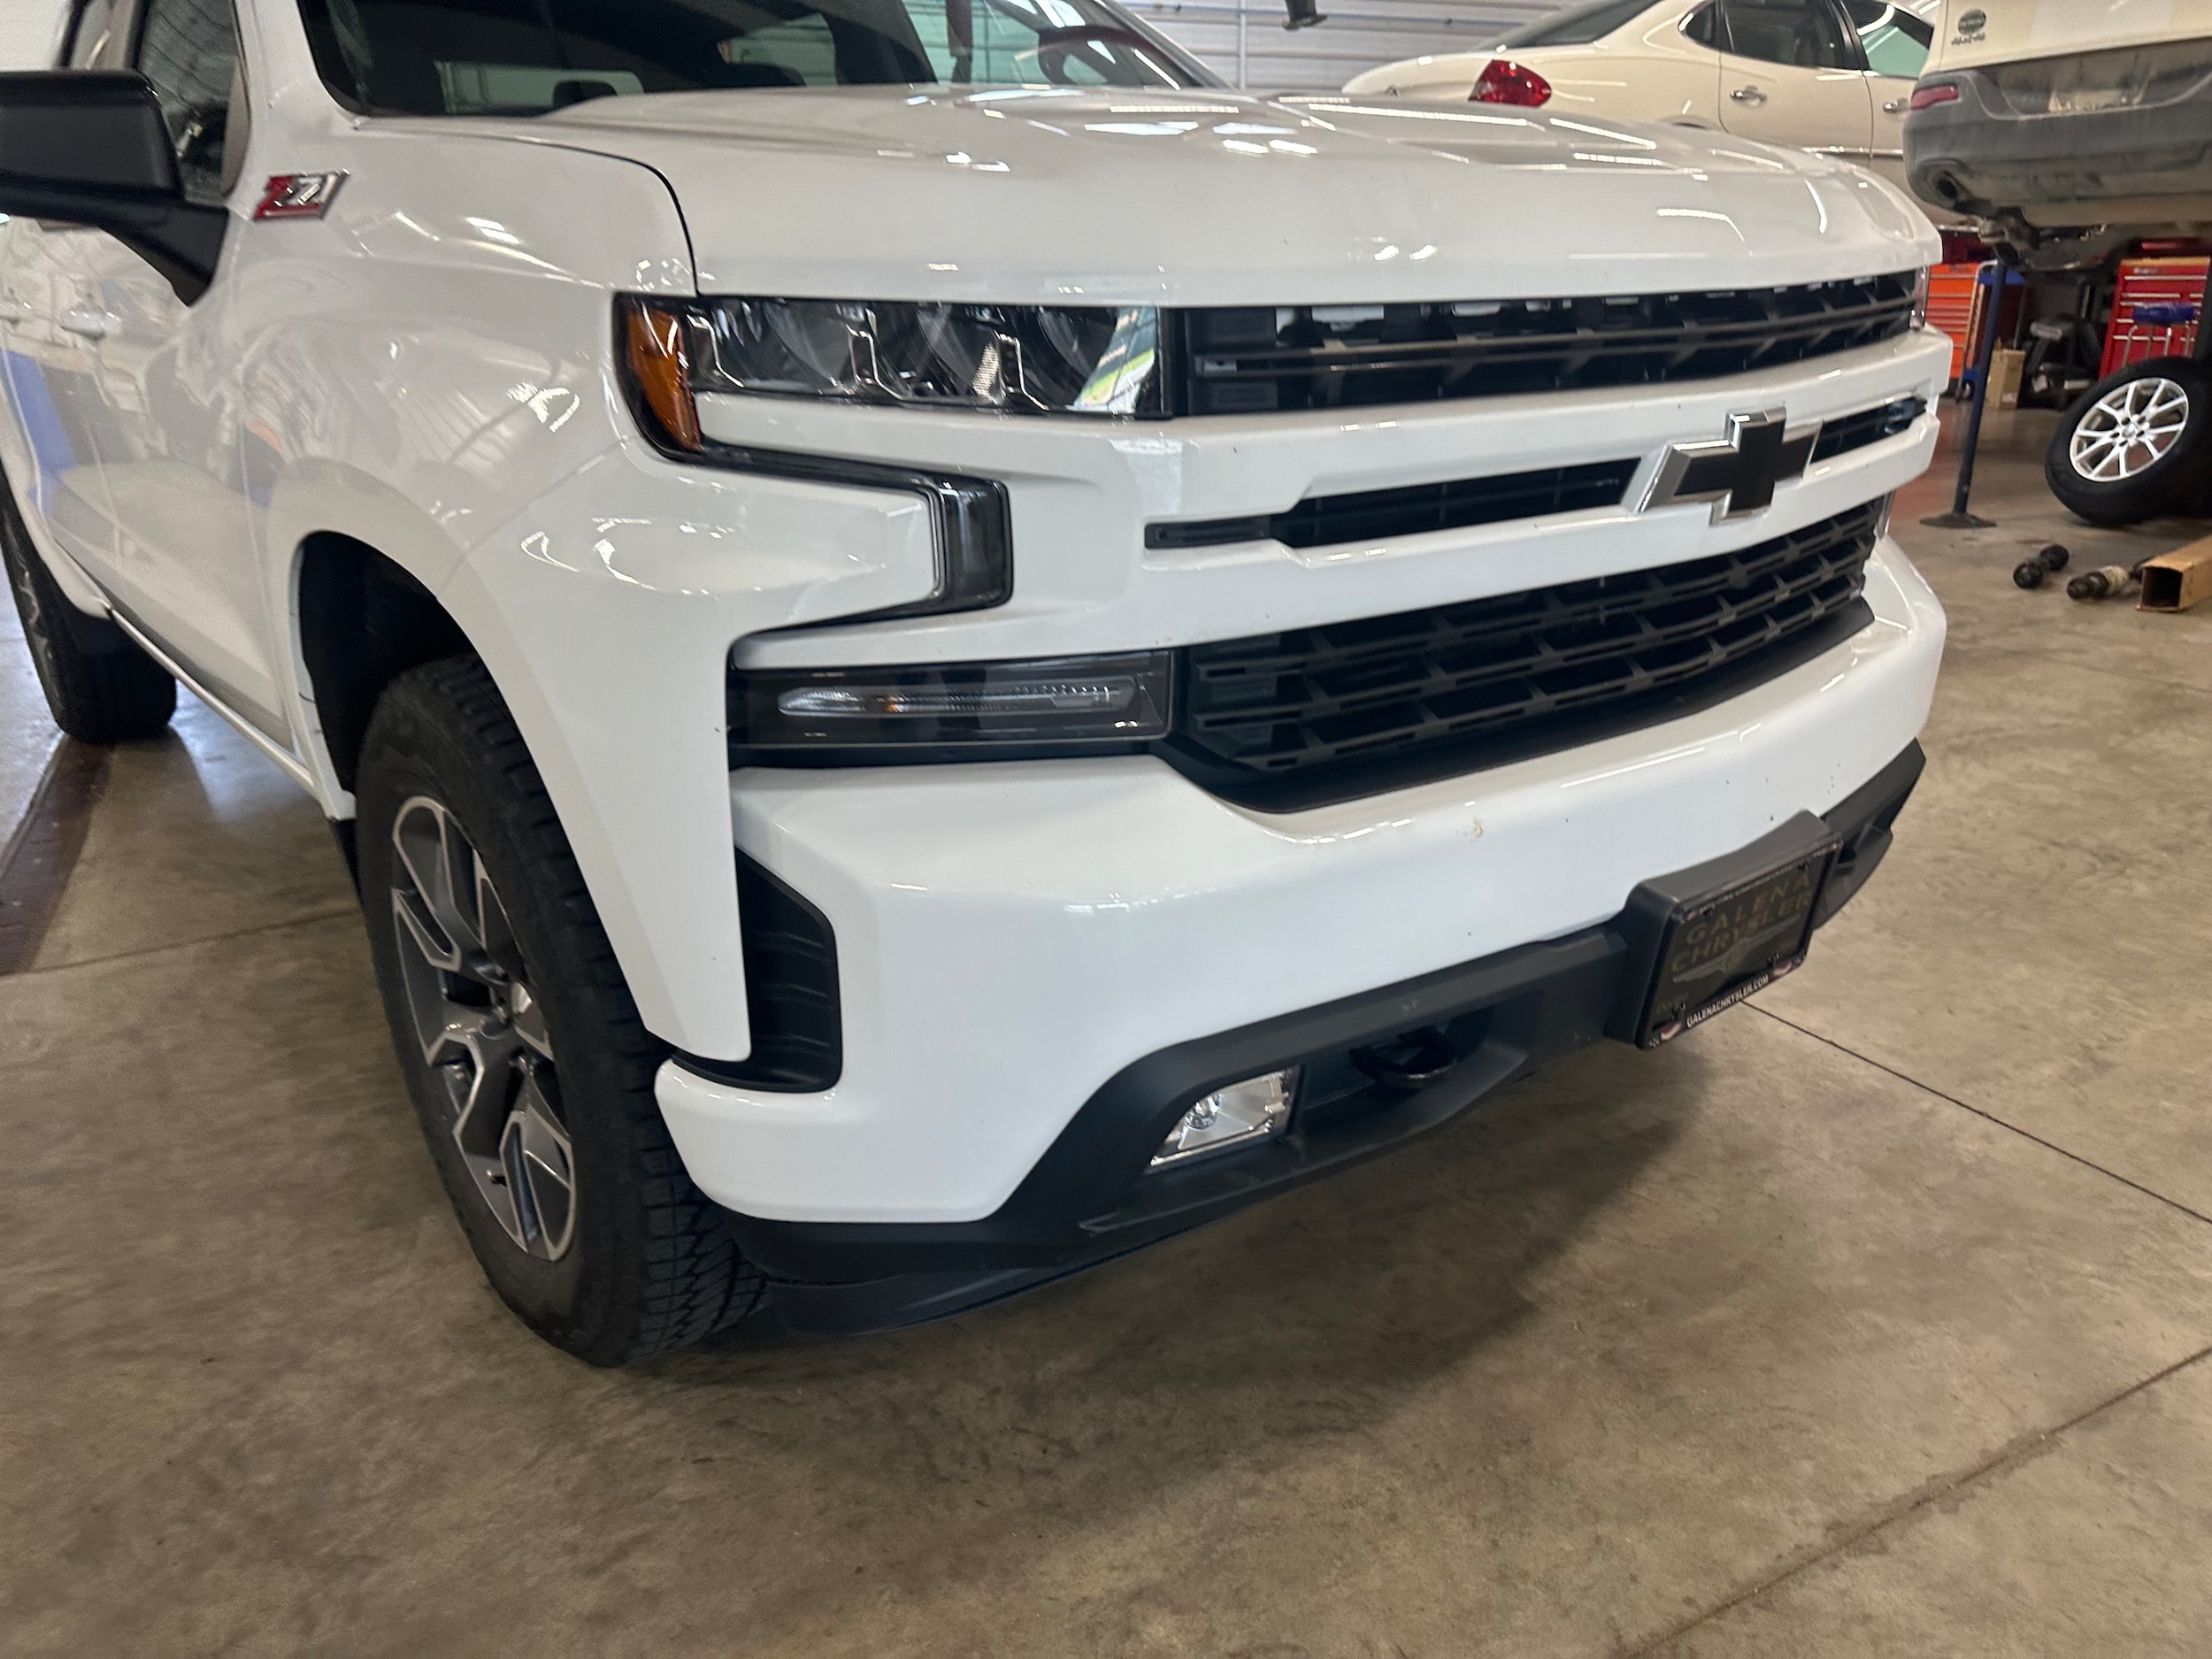 Used 2020 Chevrolet Silverado 1500 RST with VIN 3GCUYEED6LG196318 for sale in Galena, IL